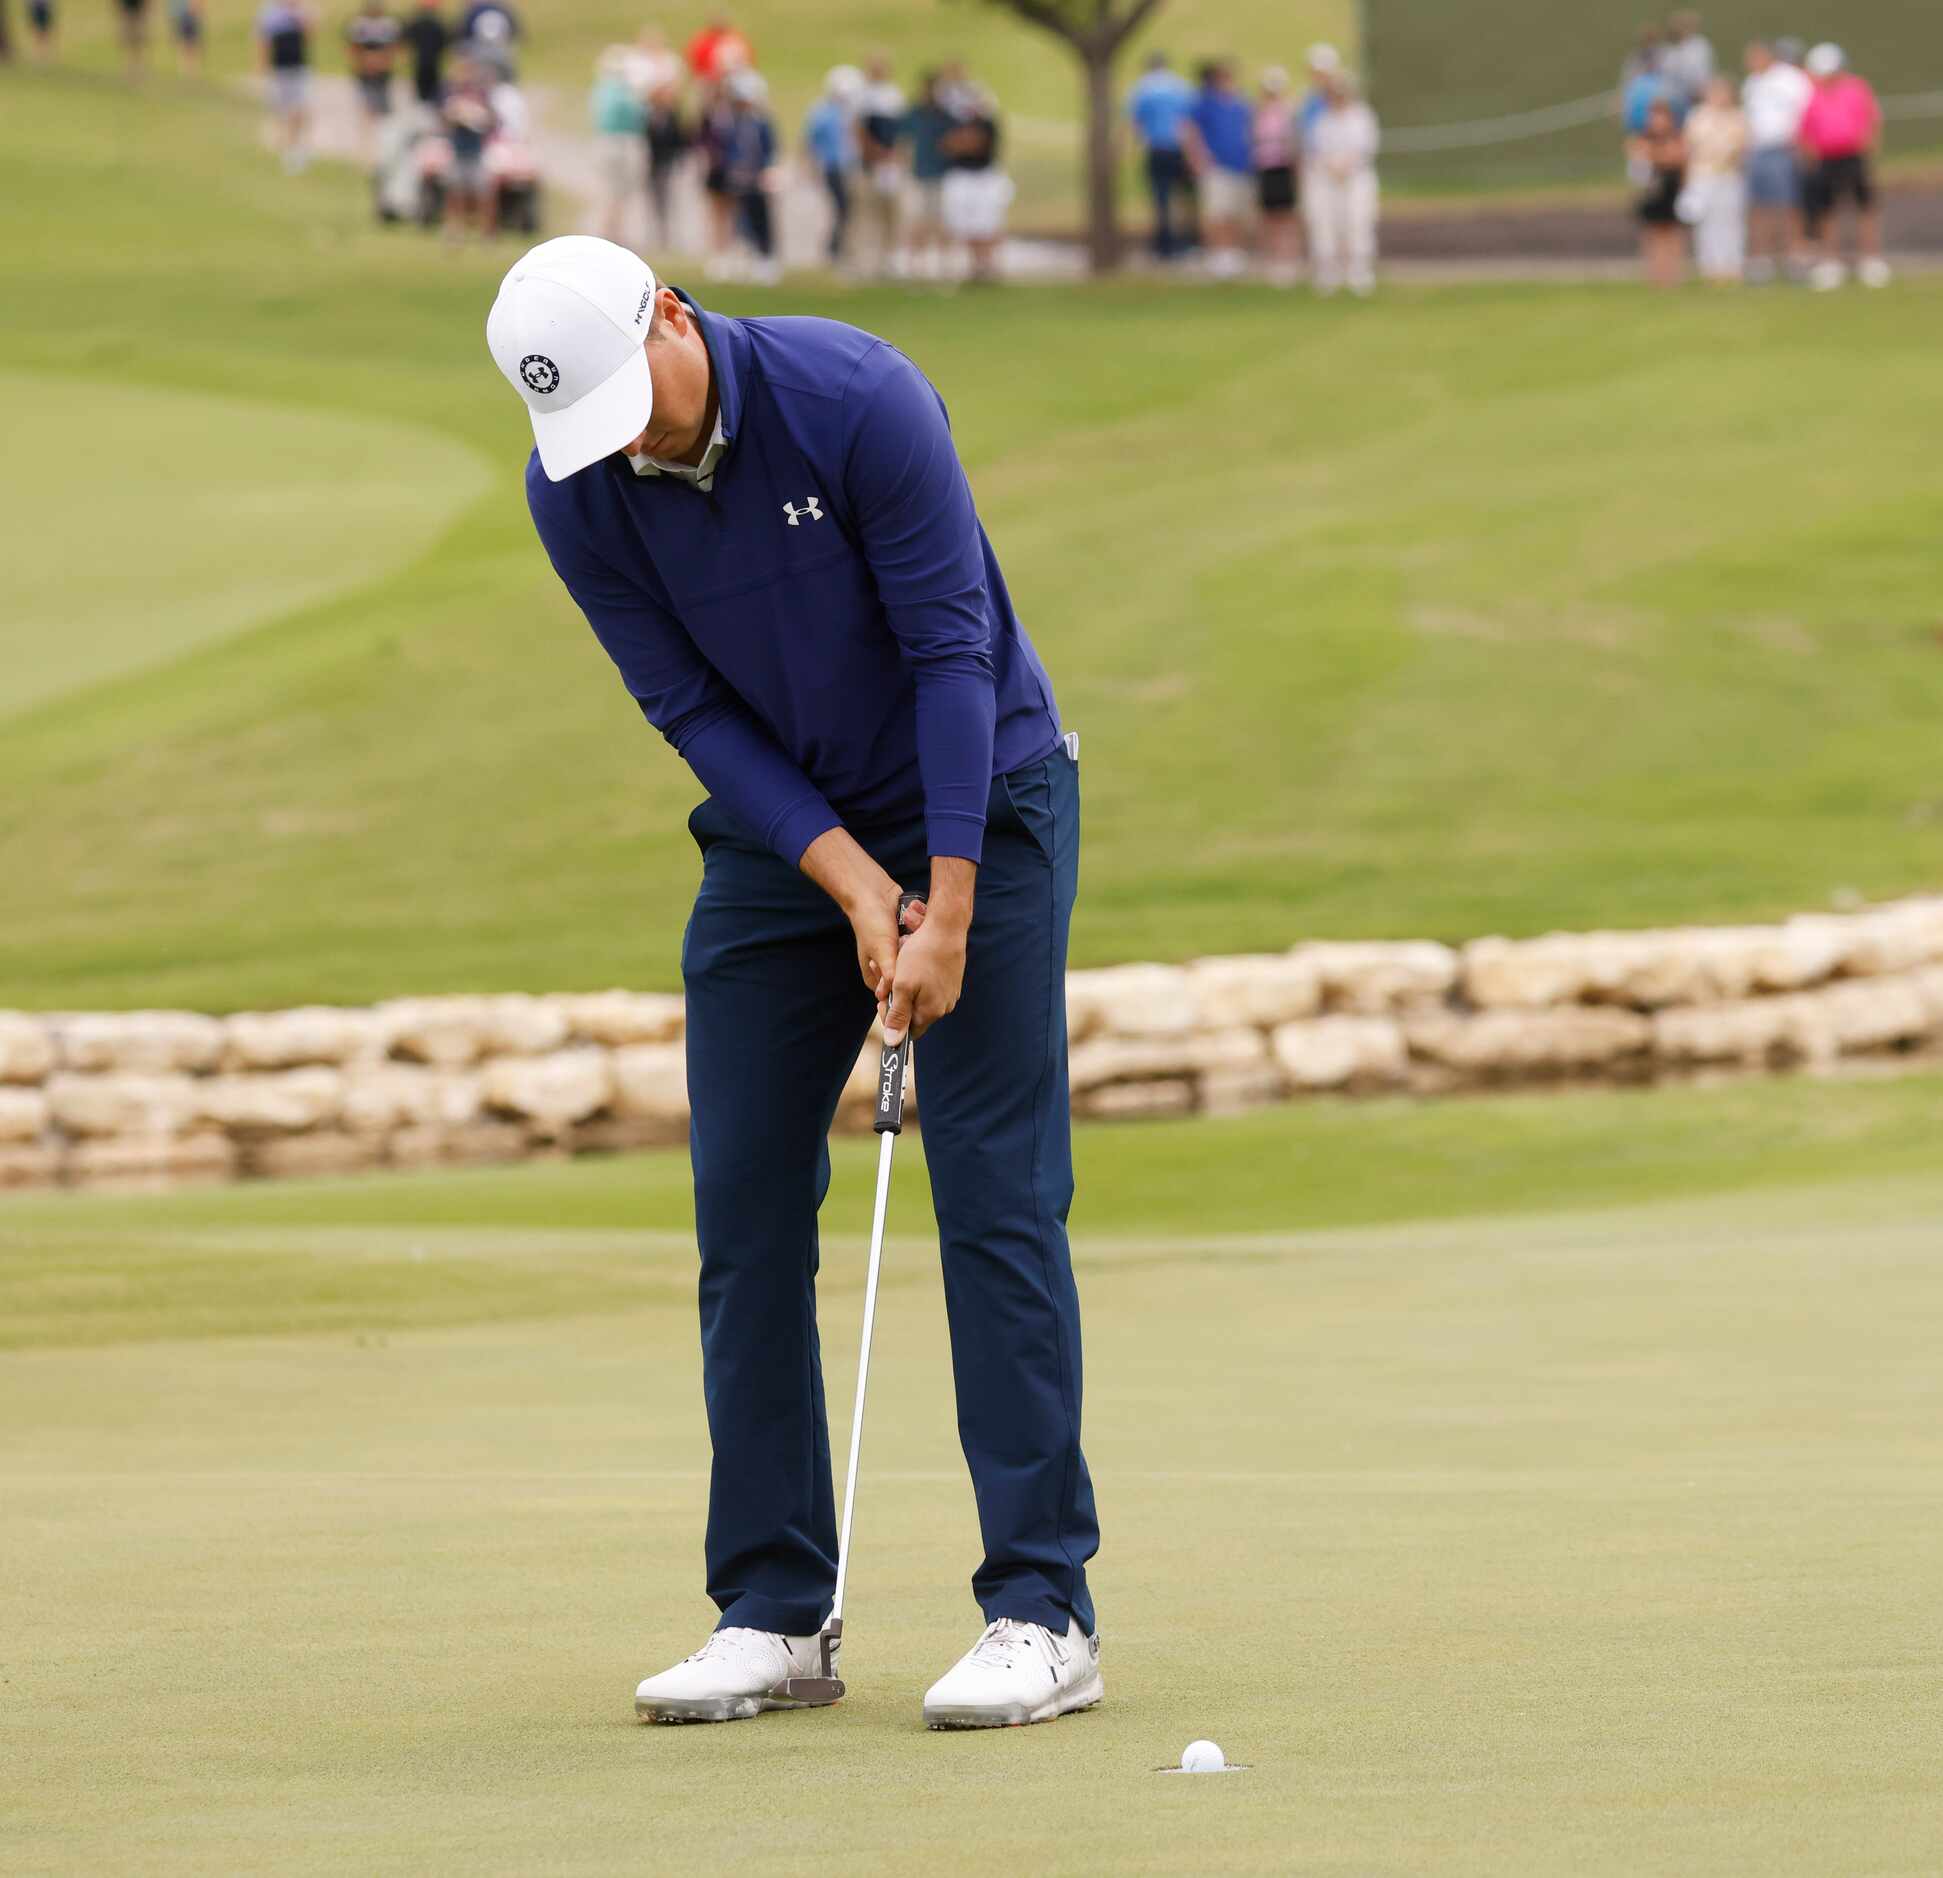 Jordan Spieth sinks a putt for par on the 18th hole during round 2 of the AT&T Byron Nelson ...